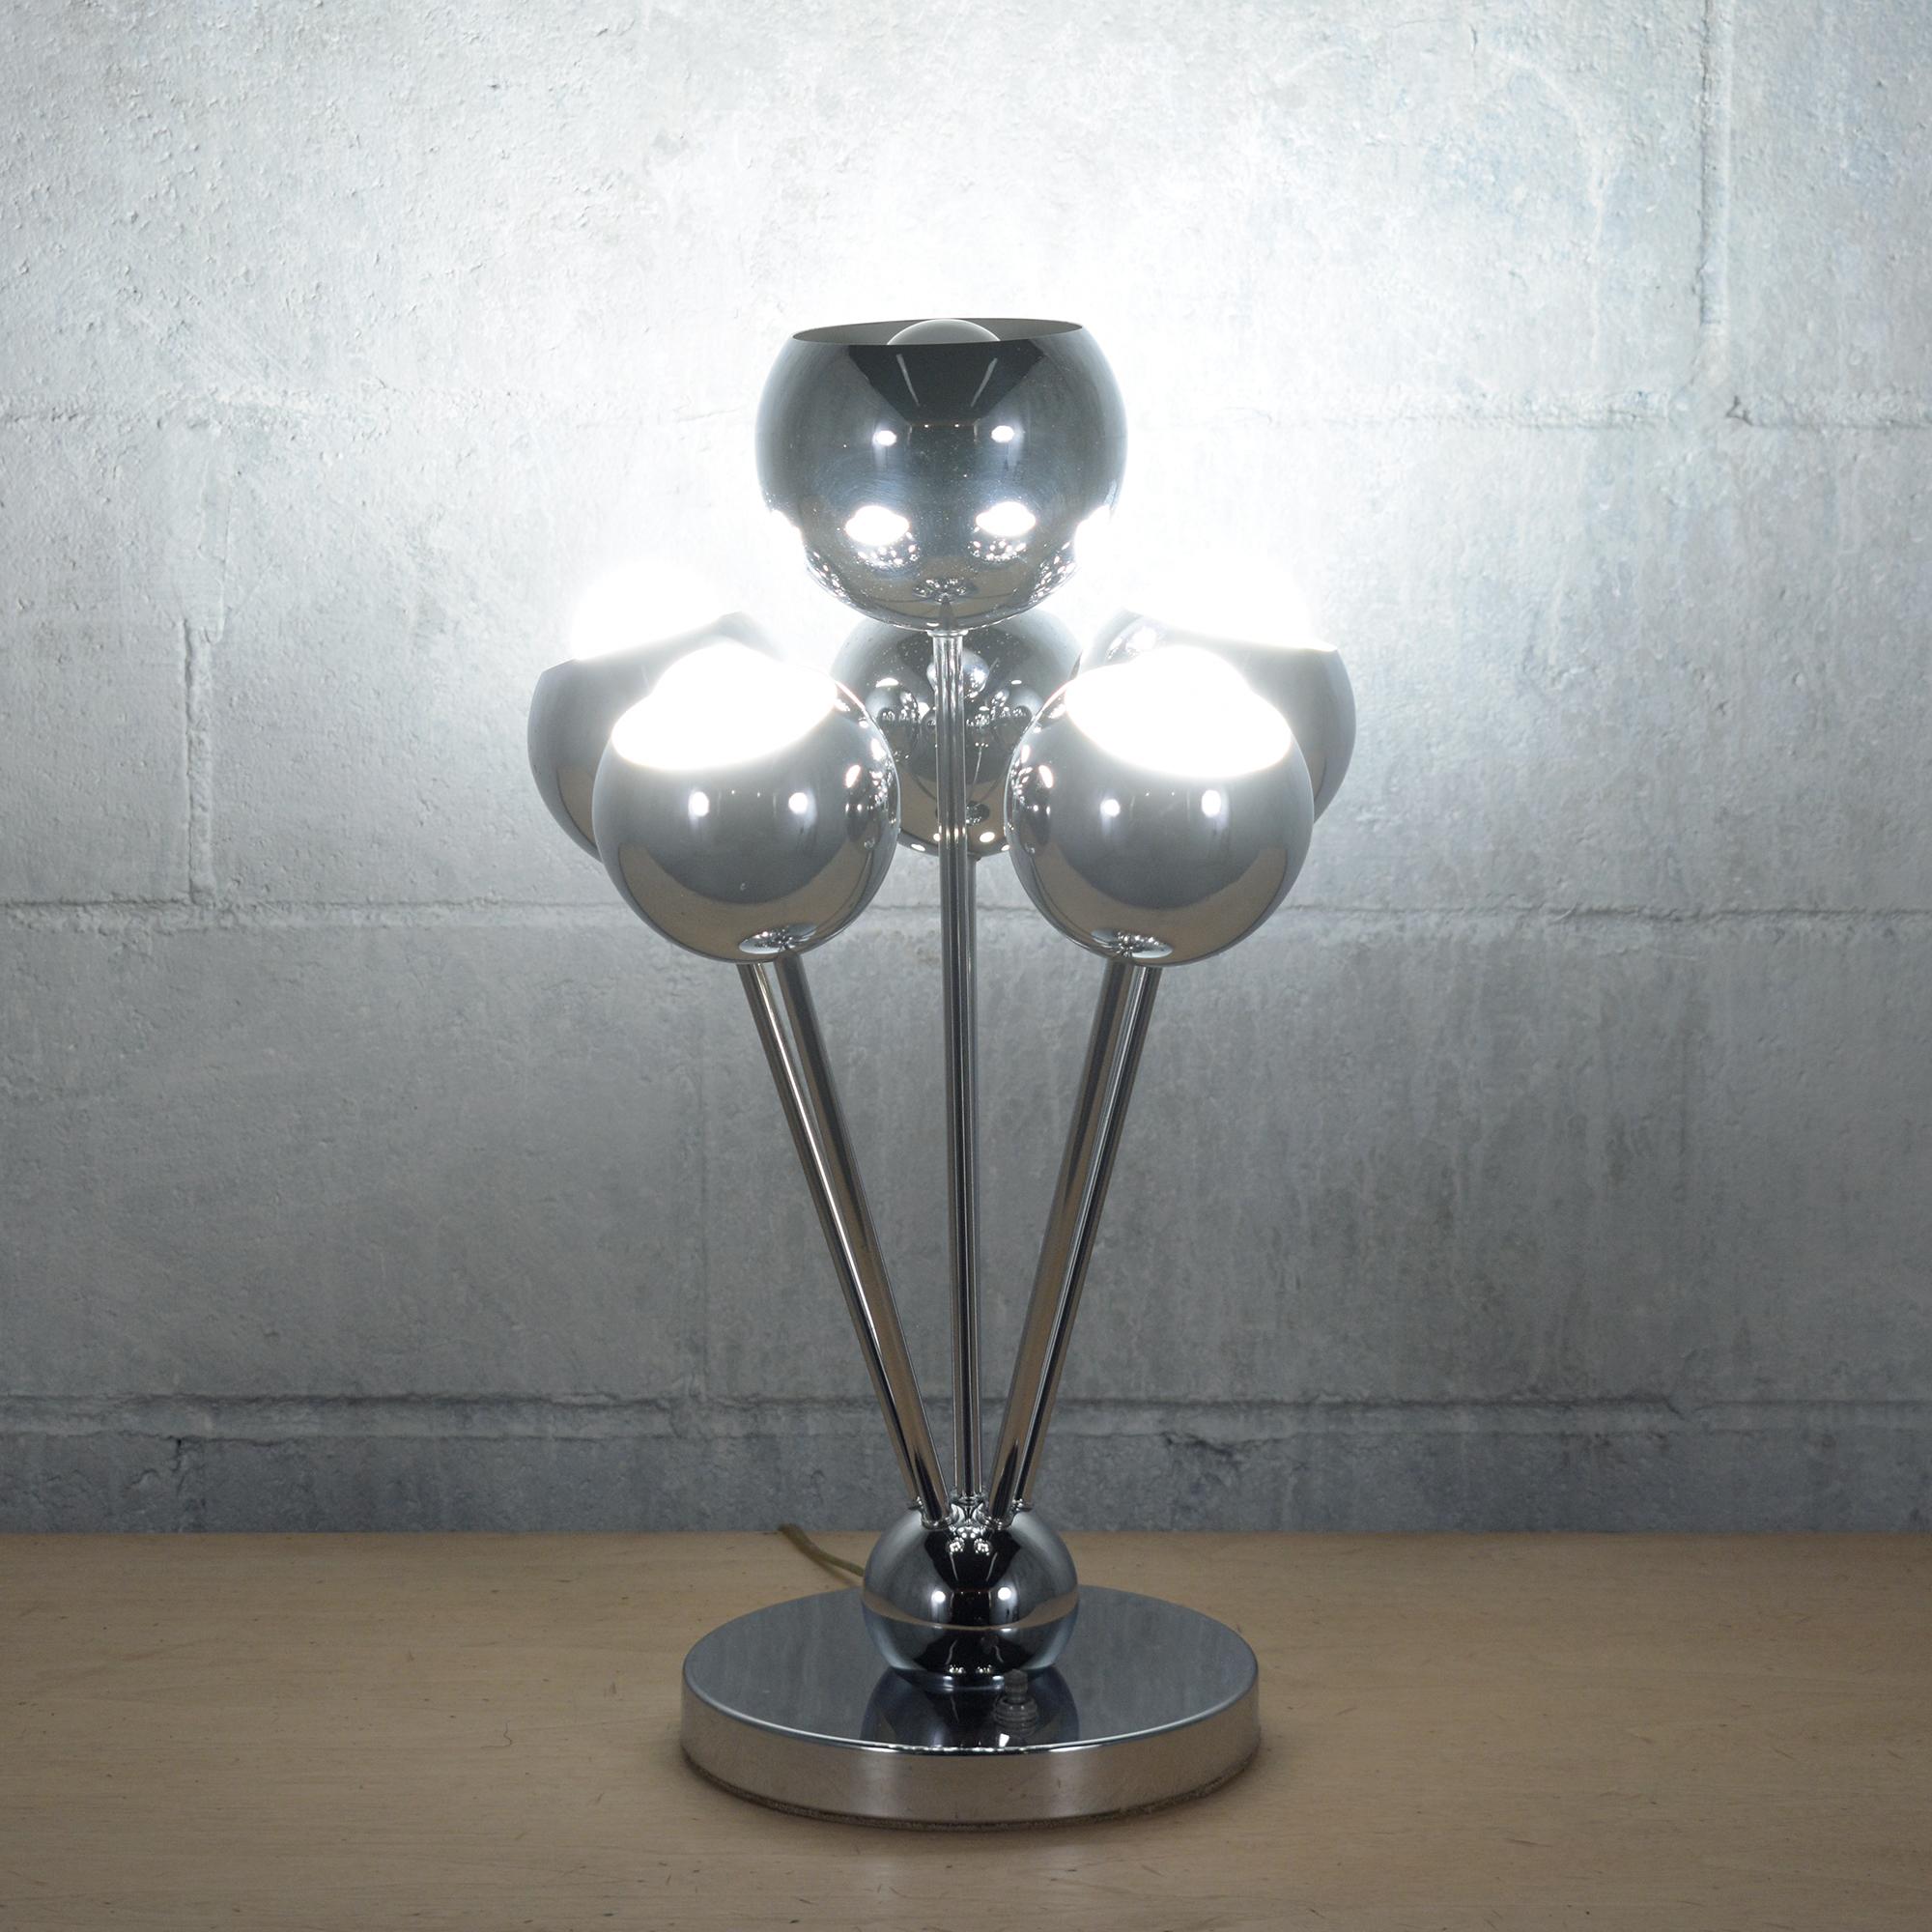 Mid-20th Century 1960s Mid-Century Modern Table Lamp: Space-Age Design Masterpiece For Sale